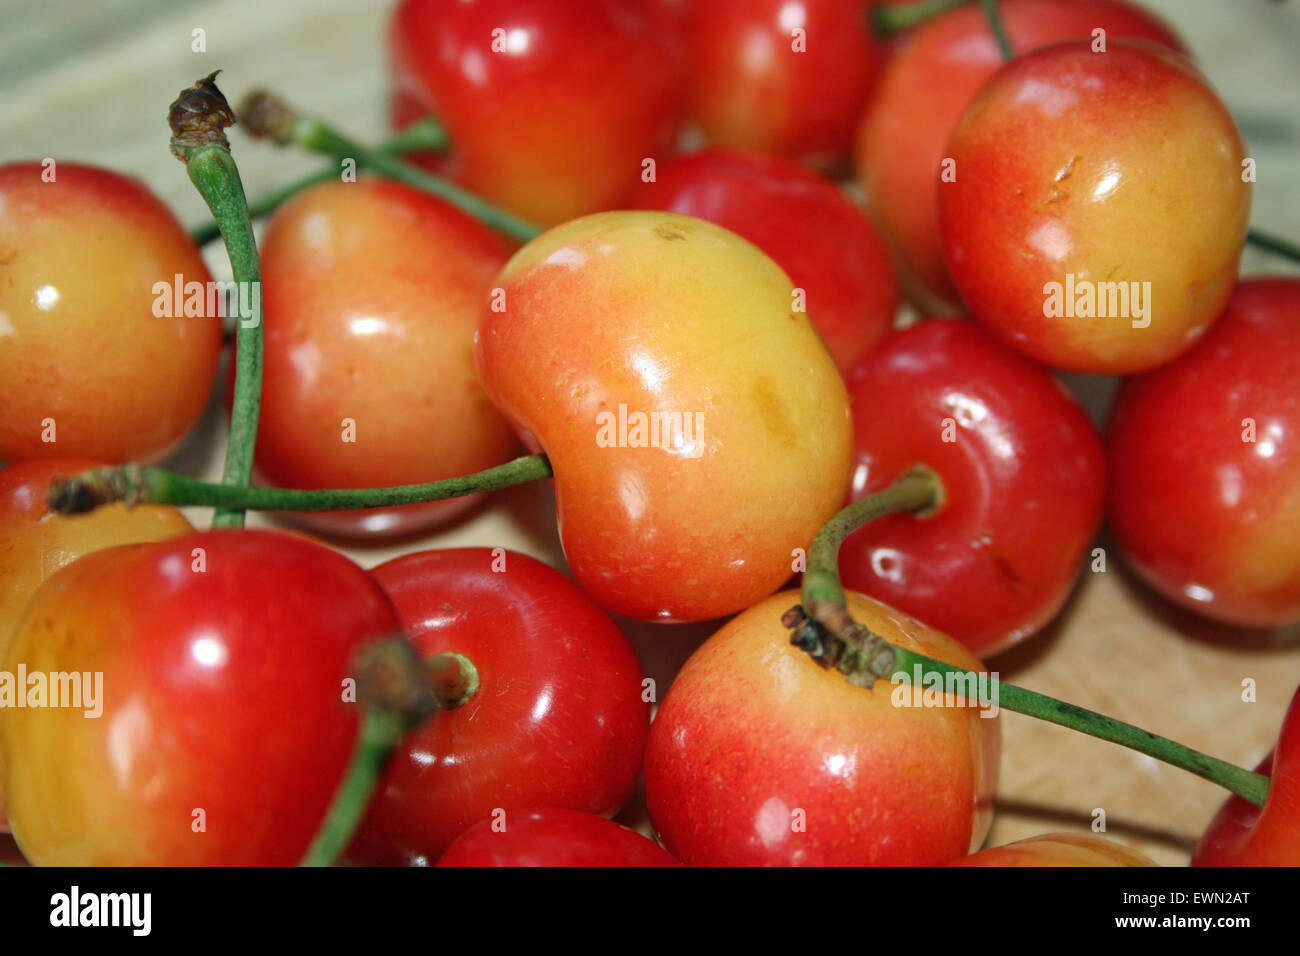 A Close-up Photograph of Ranier Cherries Stock Photo